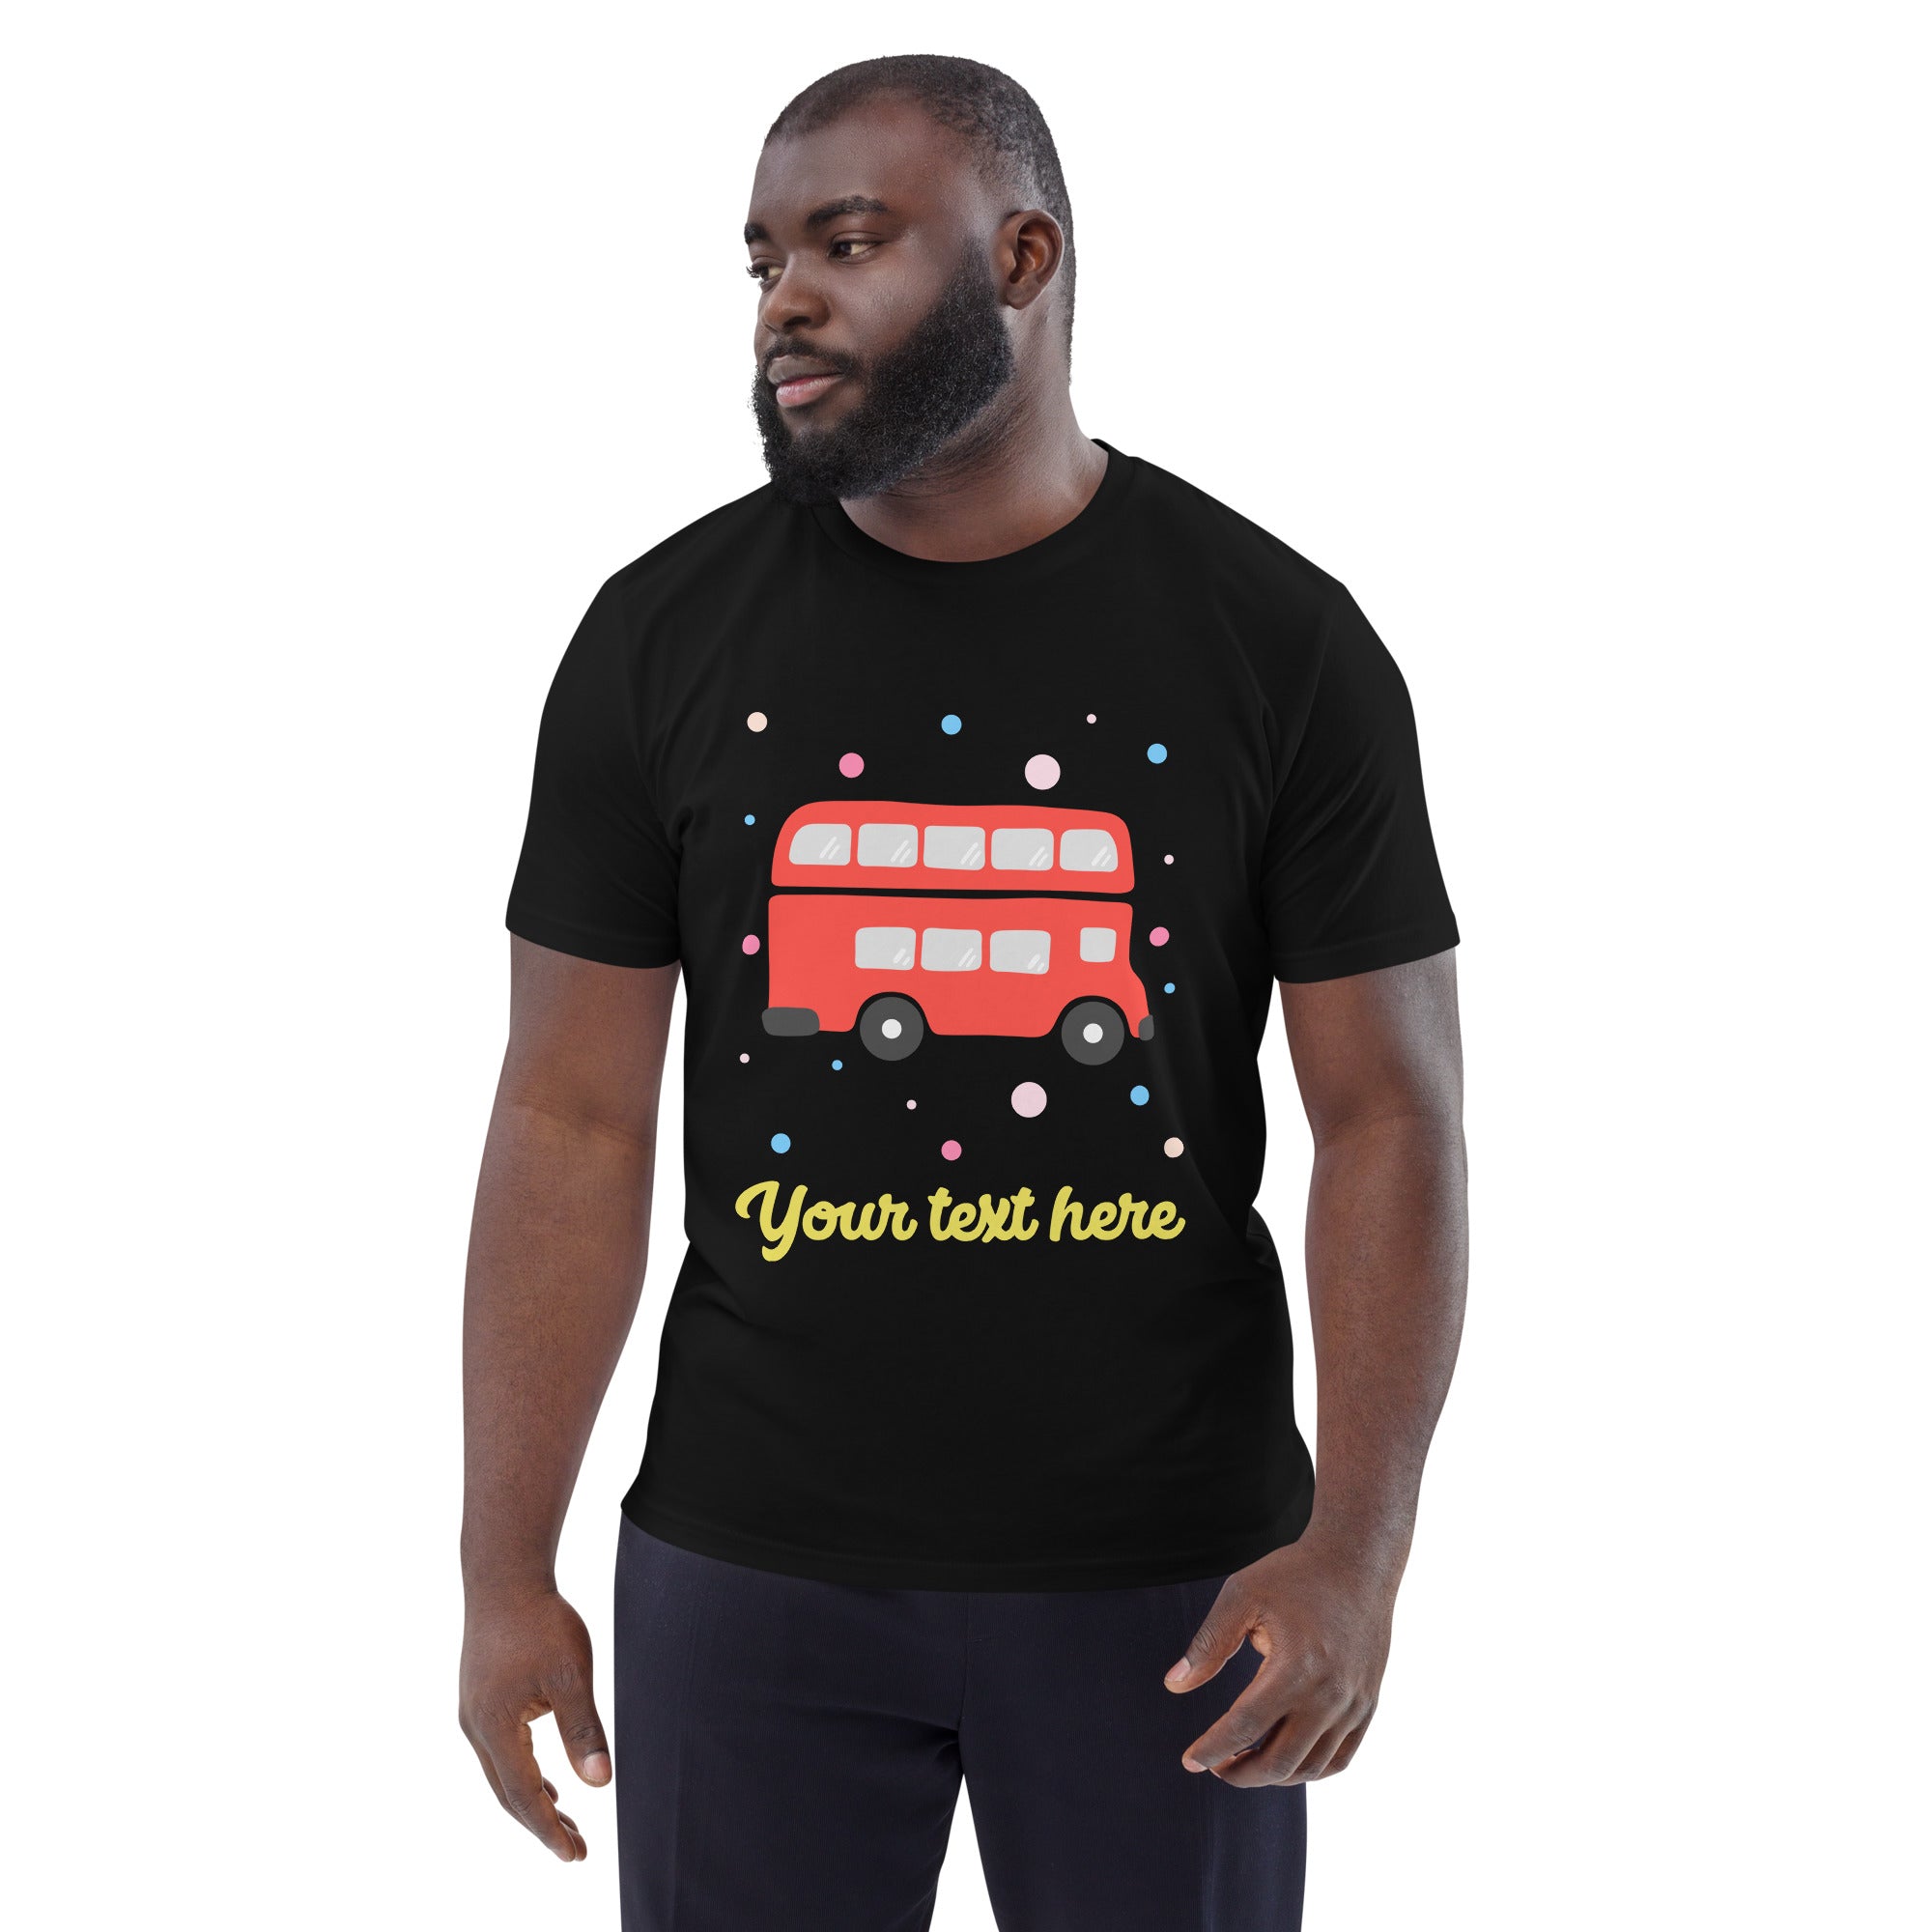 Personalised Custom Text - Organic Cotton Adults Unisex T-Shirt - London Doodles - Red Bus - Black 2